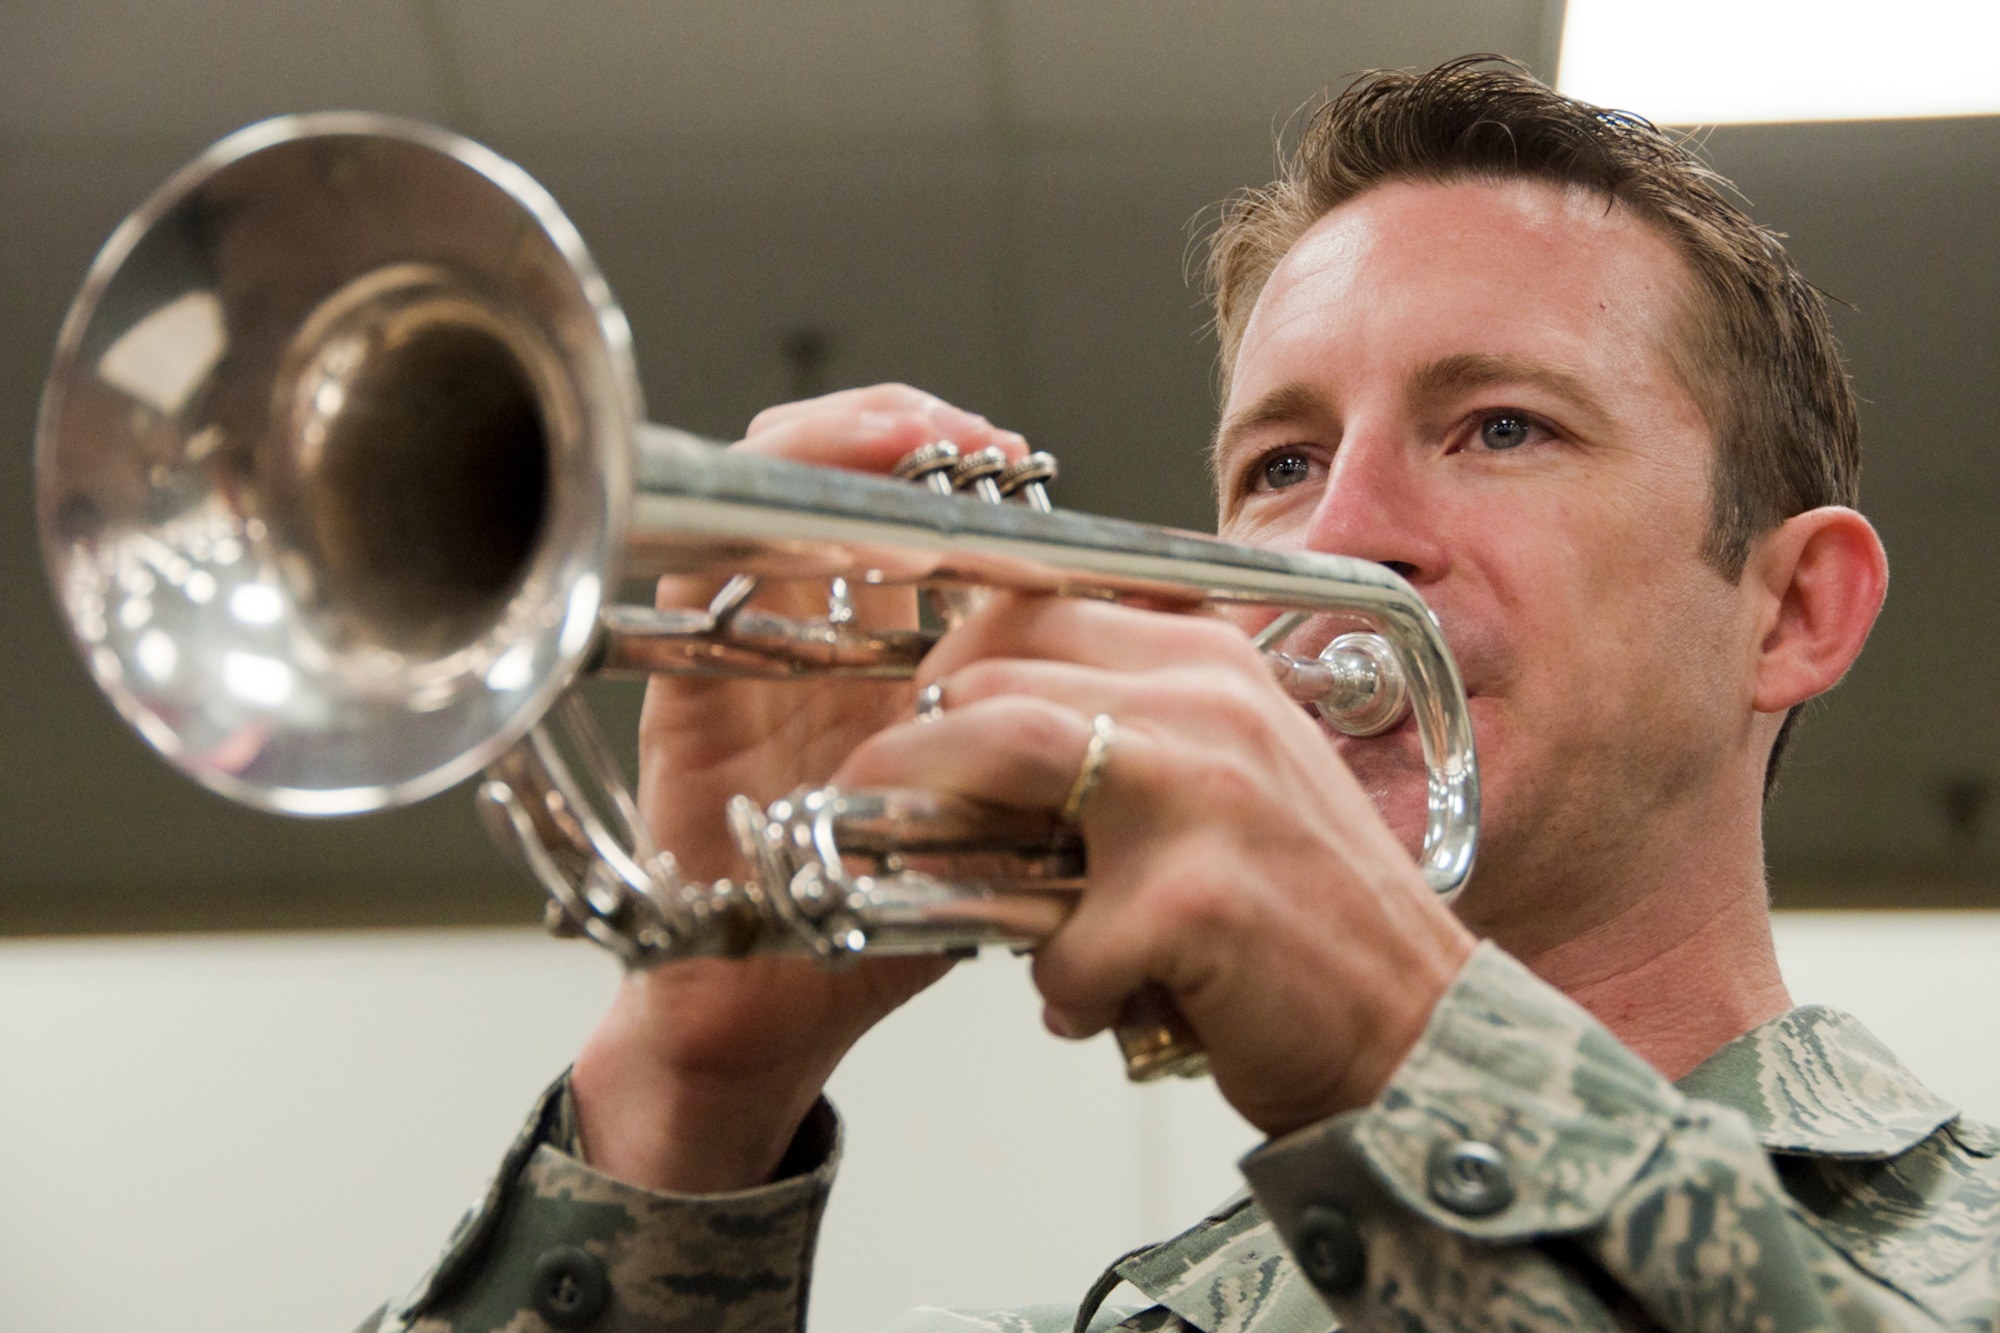 ROBINS AIR FORCE BASE, Ga. – Airman 1st Class Mark Oates, trumpet player with the Band of the U.S. Air Force Reserve, practices the trumpet for the Independence Day Concert June 21, 2012. Oates is a part of the ensemble, High Flight, a 10-piece rock/popular music group, and is playing in his first and last IDC July 2, 2012. (U.S. Air Force photo by Staff Sgt. Megan Tomkins)